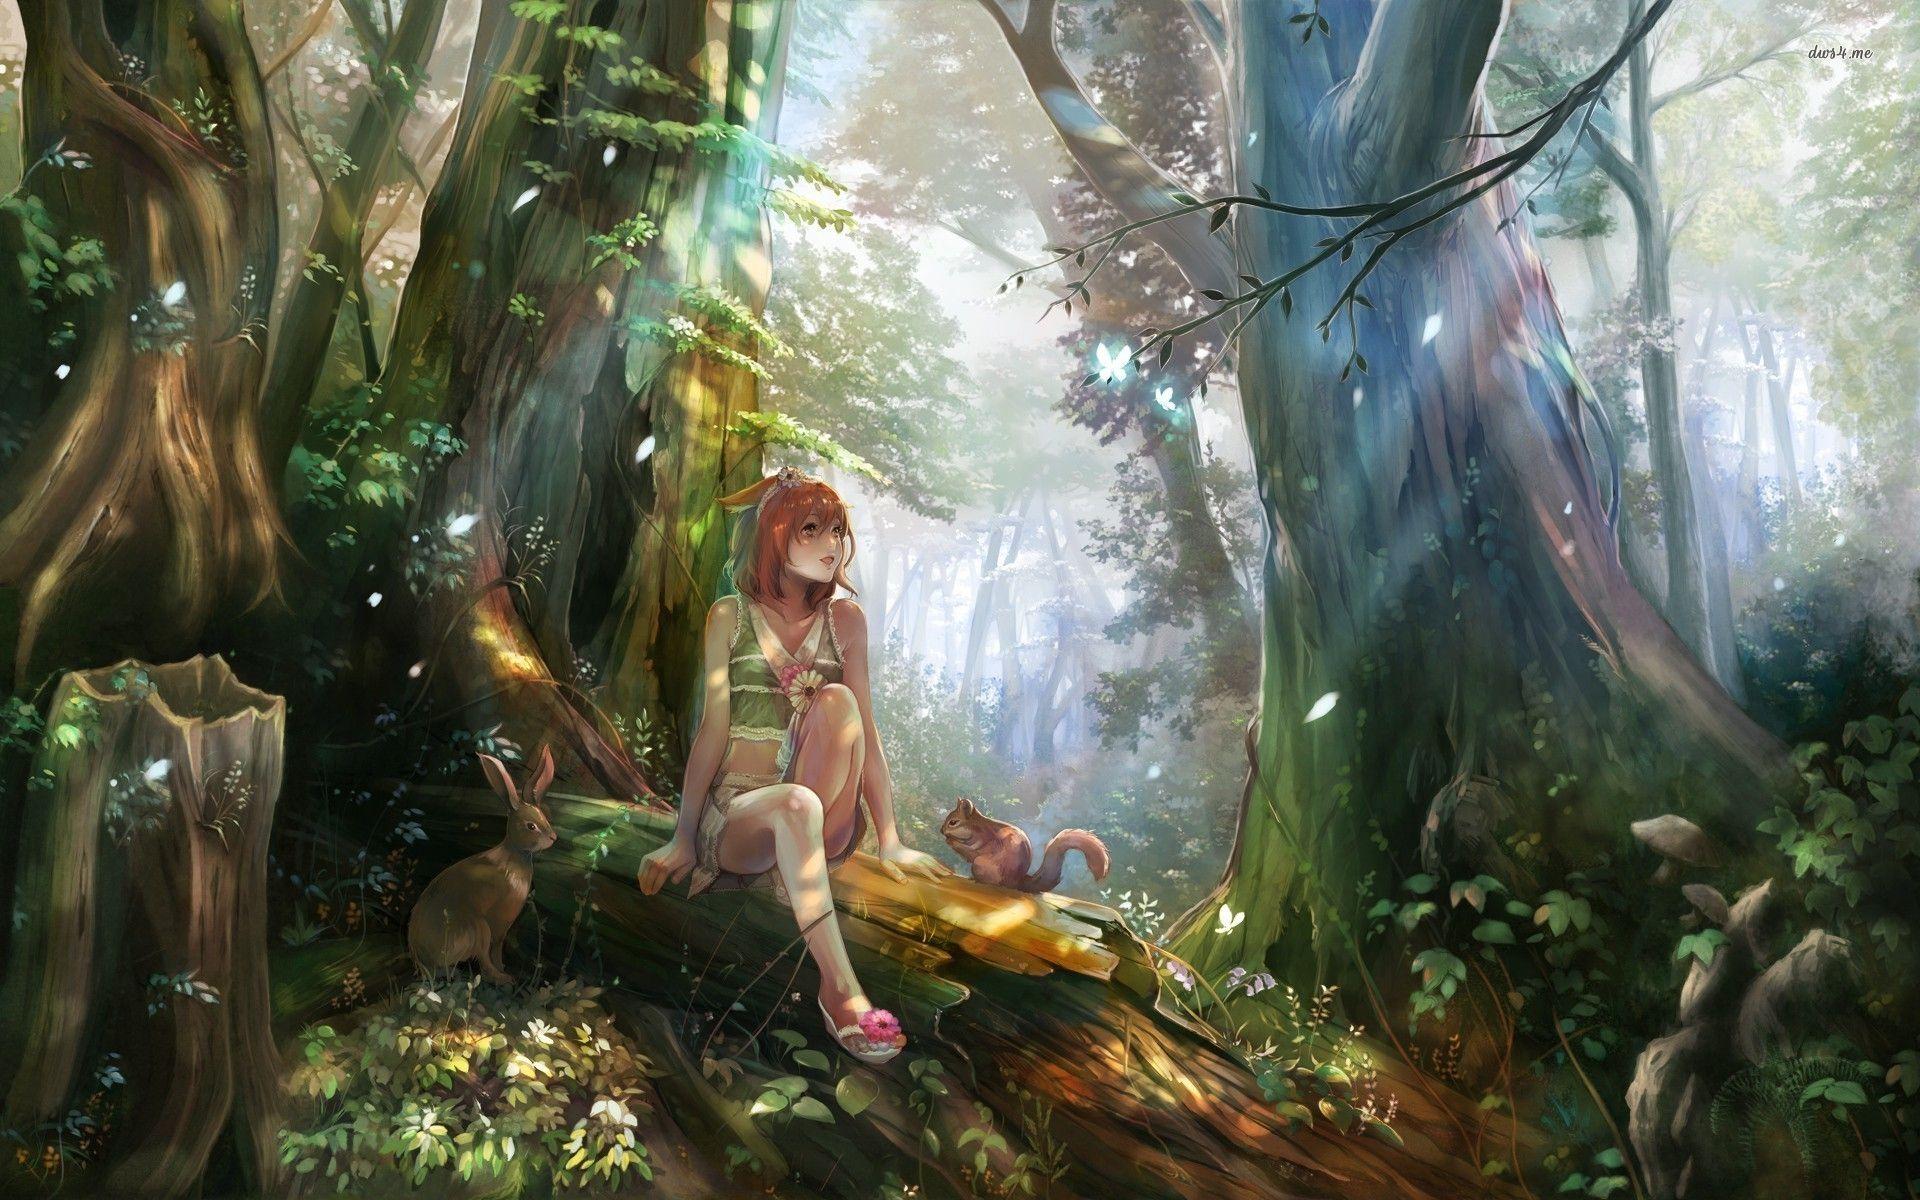 Magic Forest Wallpaper. Anime art fantasy, Fantasy forest, Magical forest